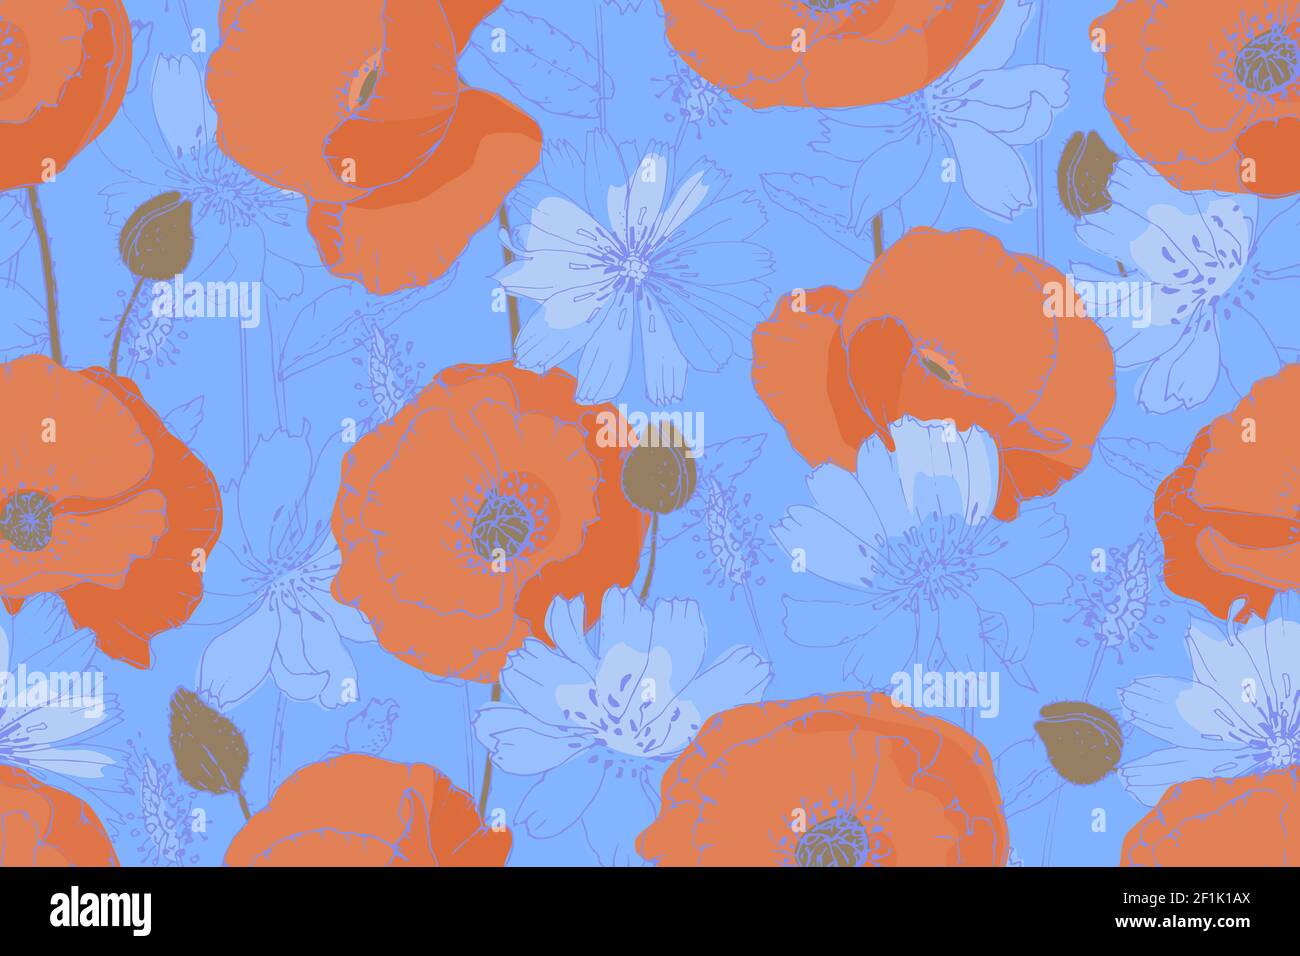 Vector floral seamless pattern. Orange poppies, blue chicory. Stock Vector